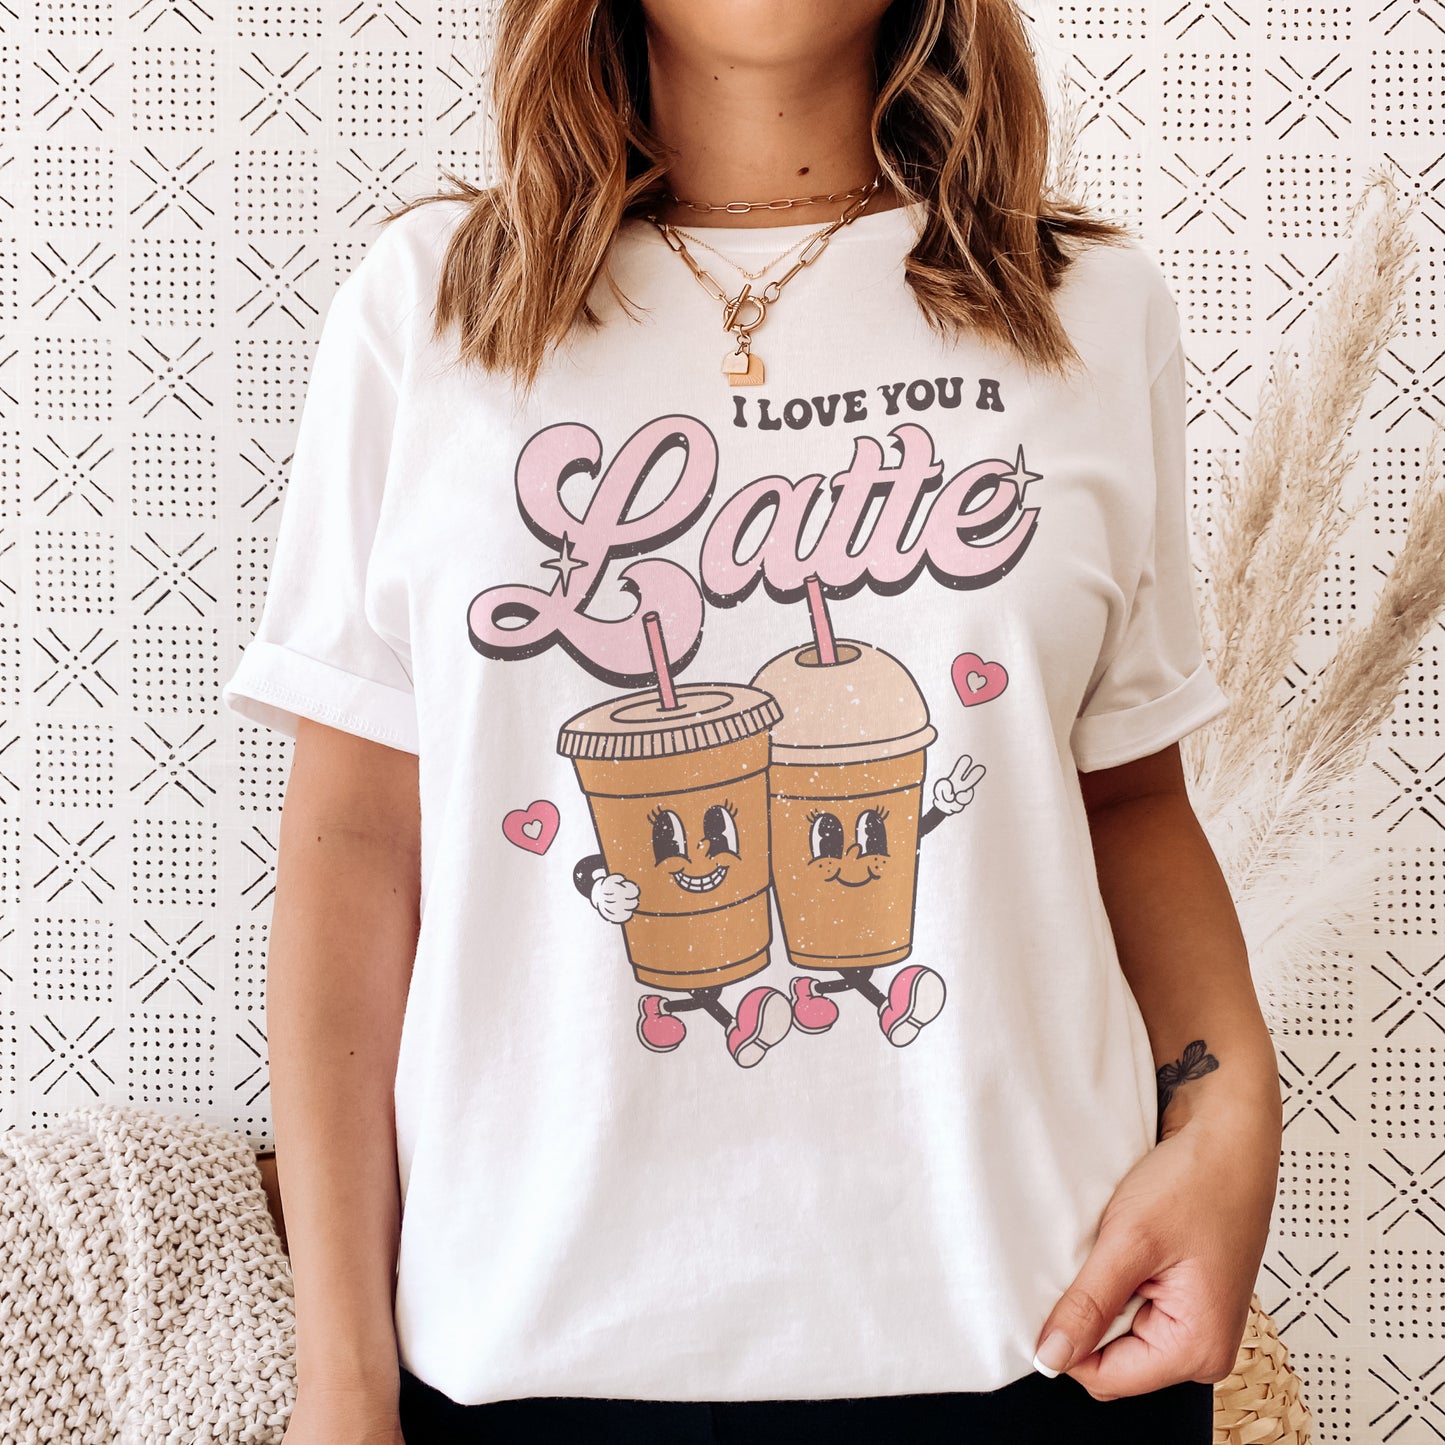 Love You A Latte T-Shirt Funny VDay Shirt Valentines Day Tshirt Funny Sarcastic Tee Funny Valentines T-Shirt Soft Print Tshirt Sublimation Print Tee